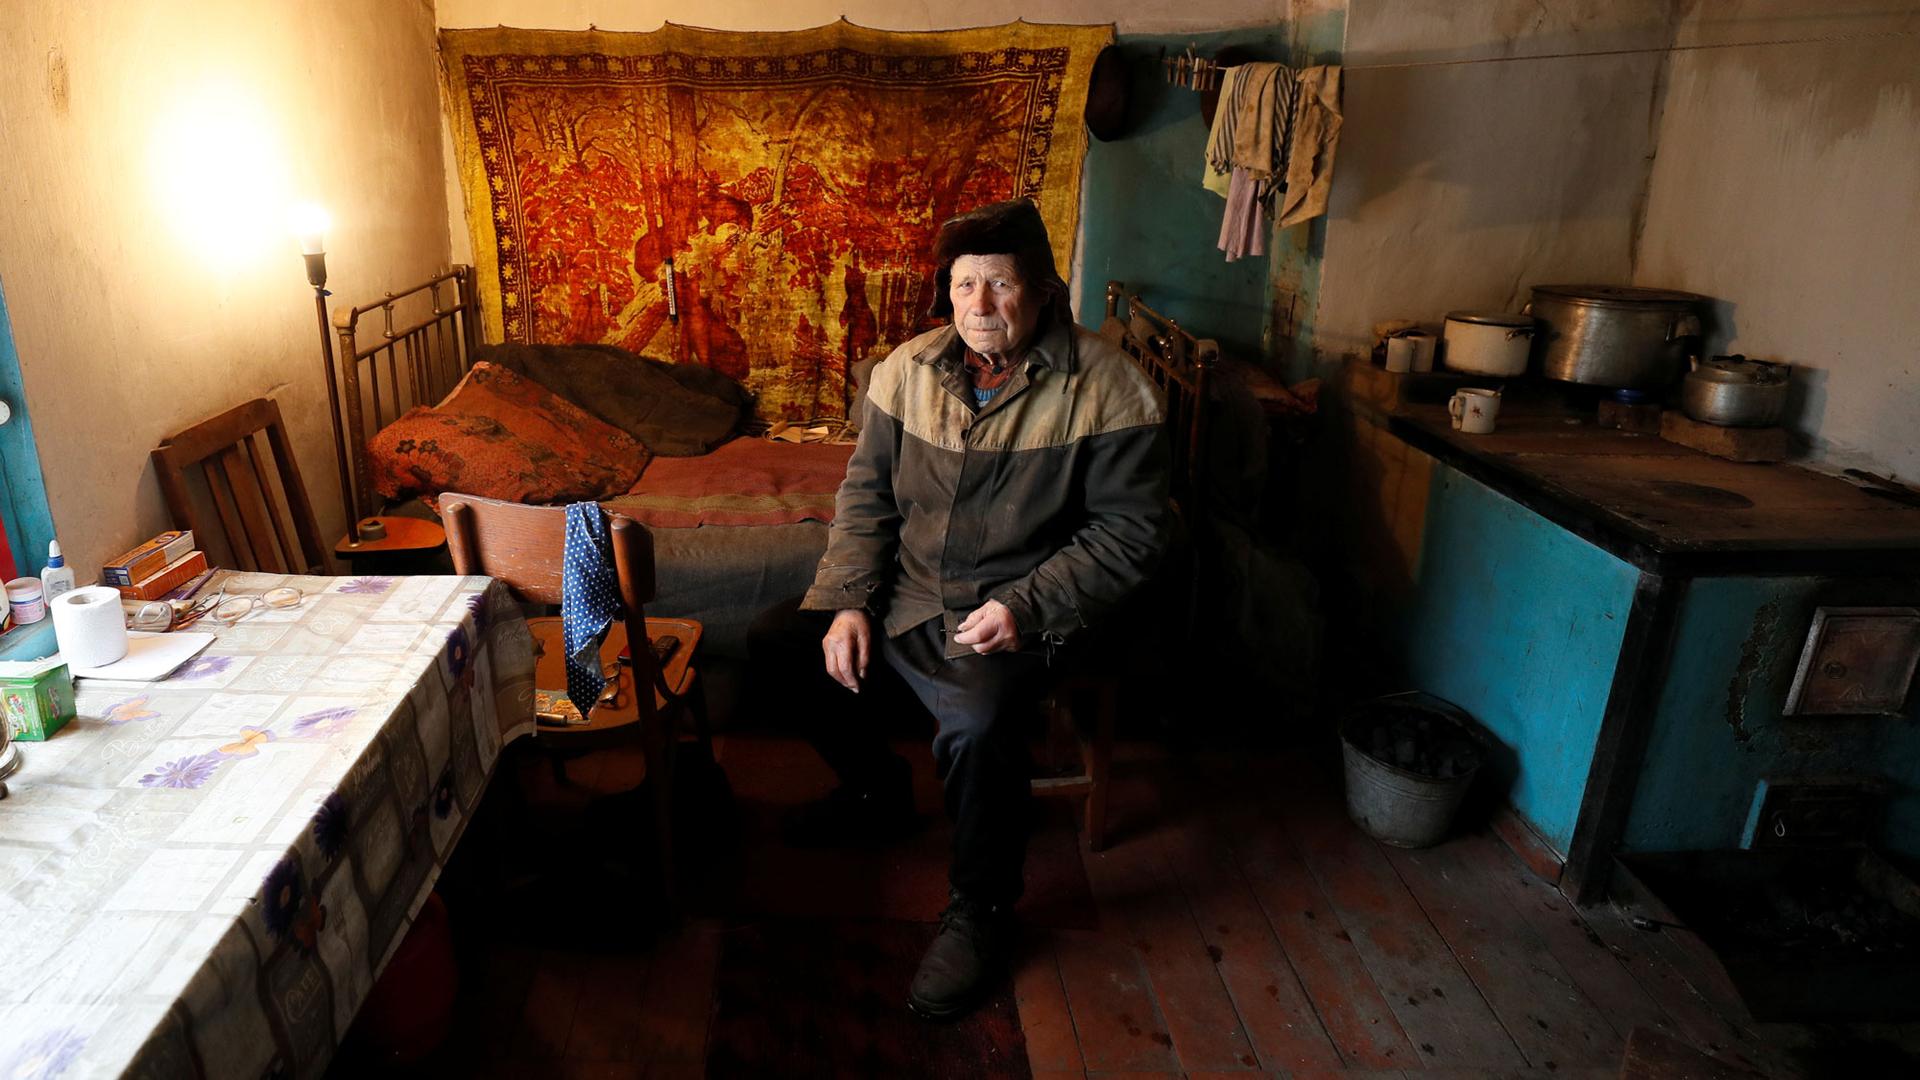 Vitaliy Kudla is shown wearing a two-tone jacket and hat while sitting in a small room with a bed behind him.